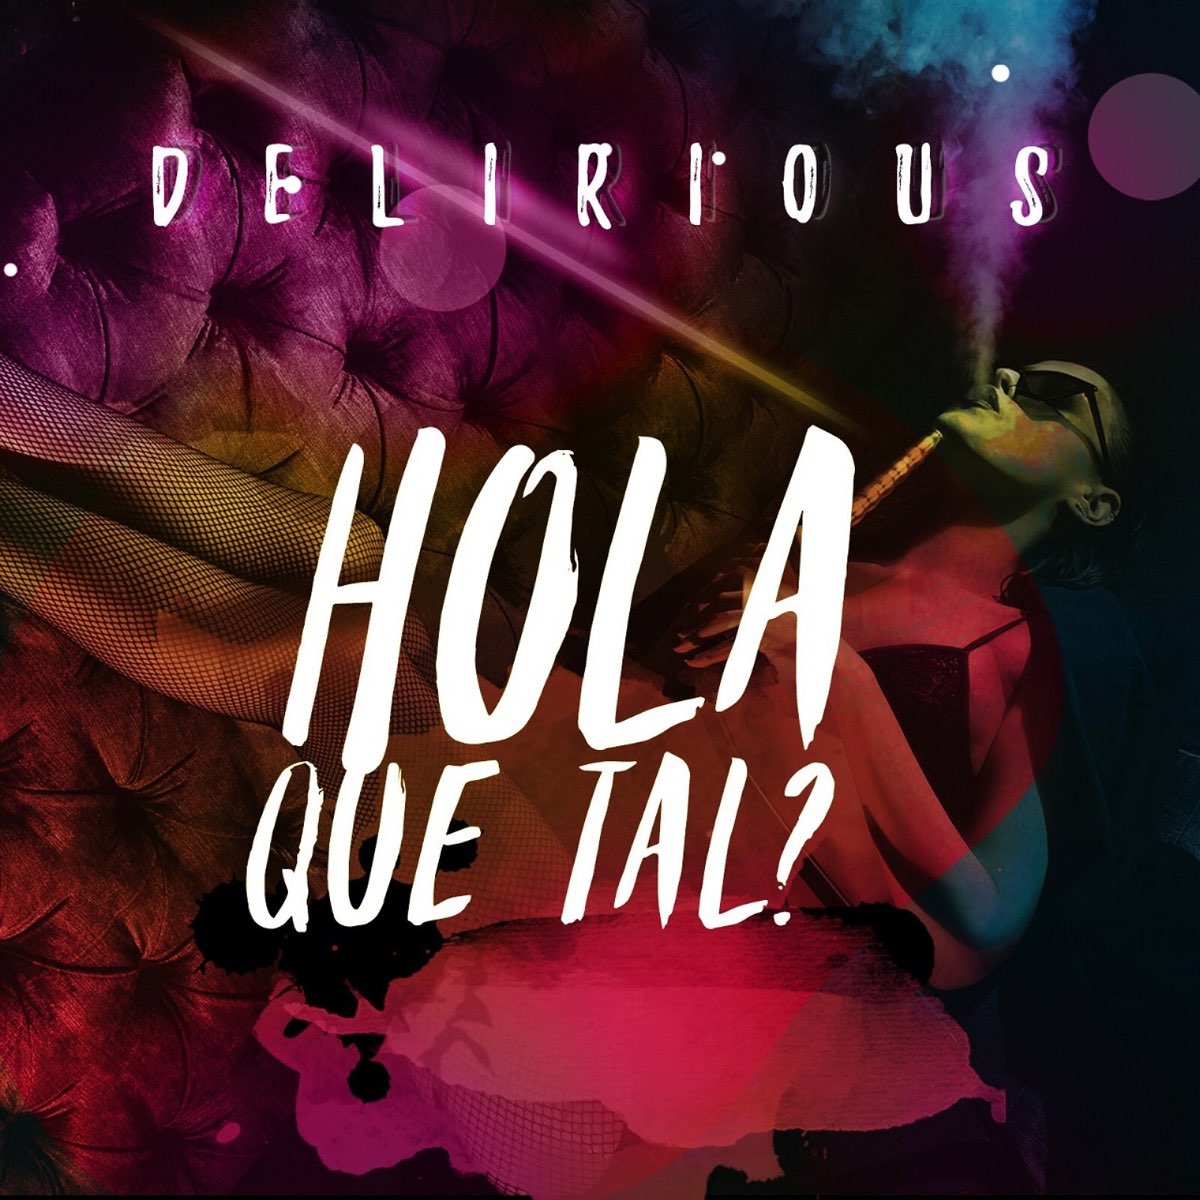 Hola Que Tal - Single by Delirious on Apple Music